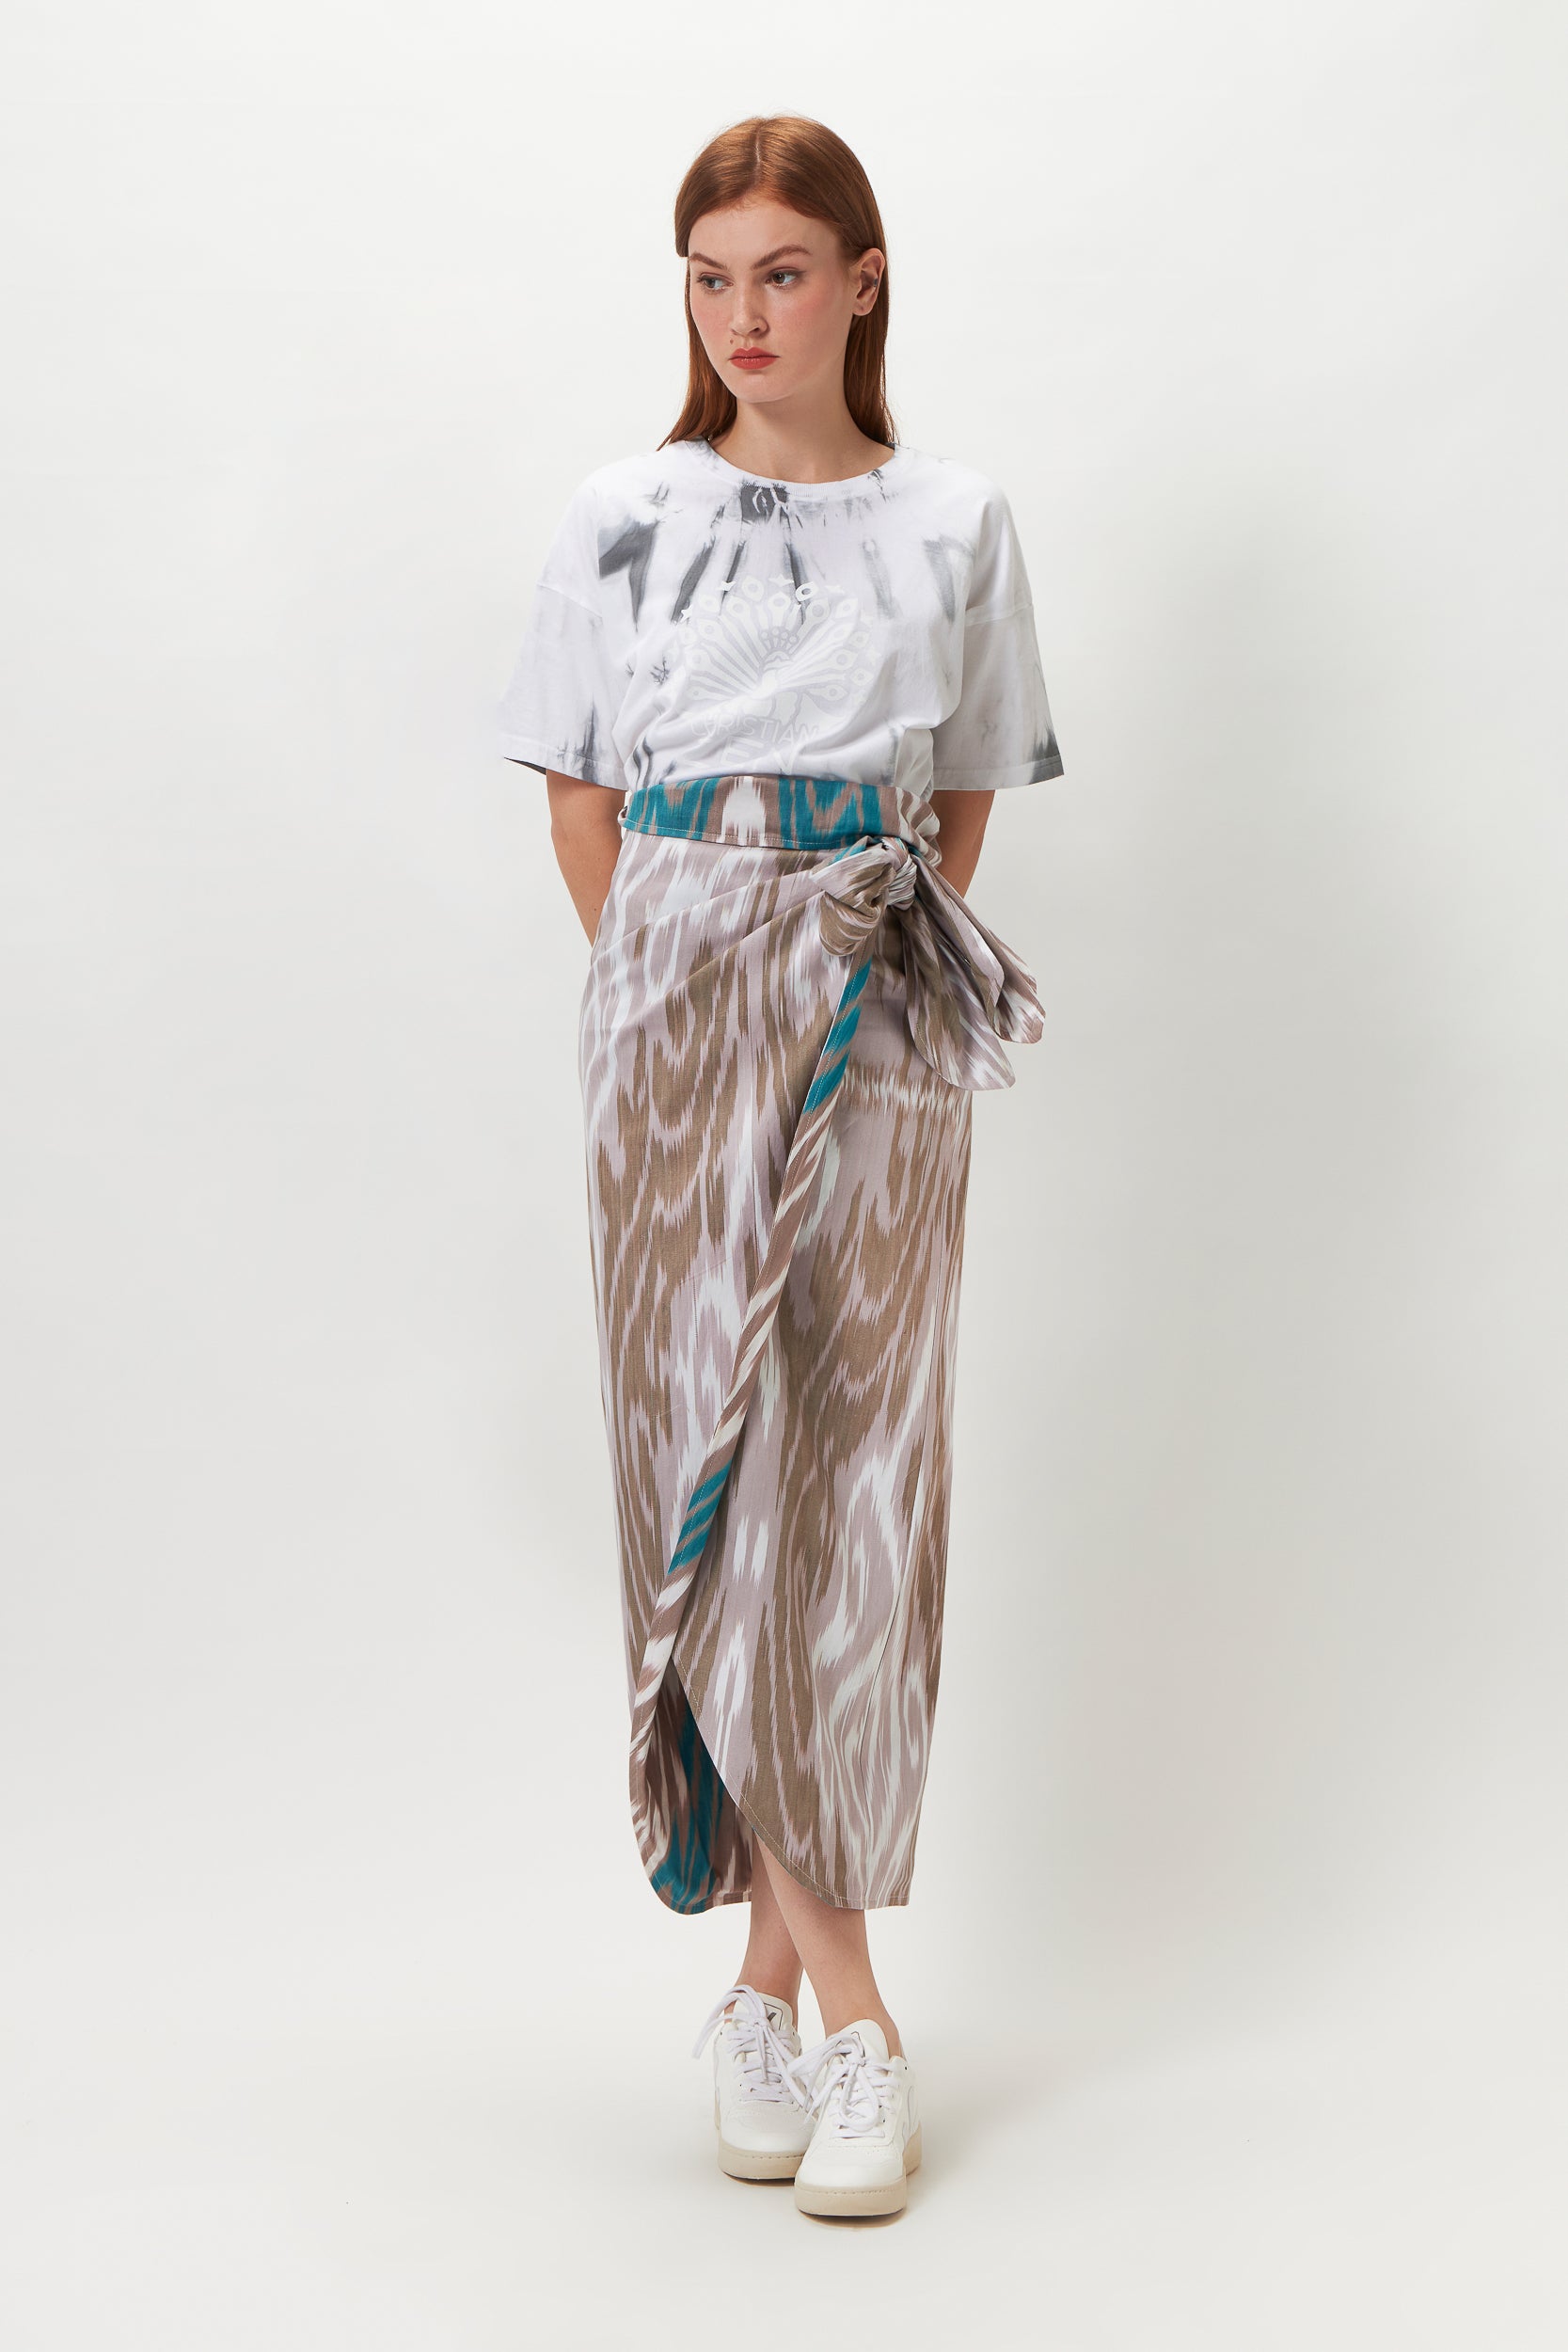 MARA ONE OF A KIND DOUBLE-FACED IKAT SKIRT